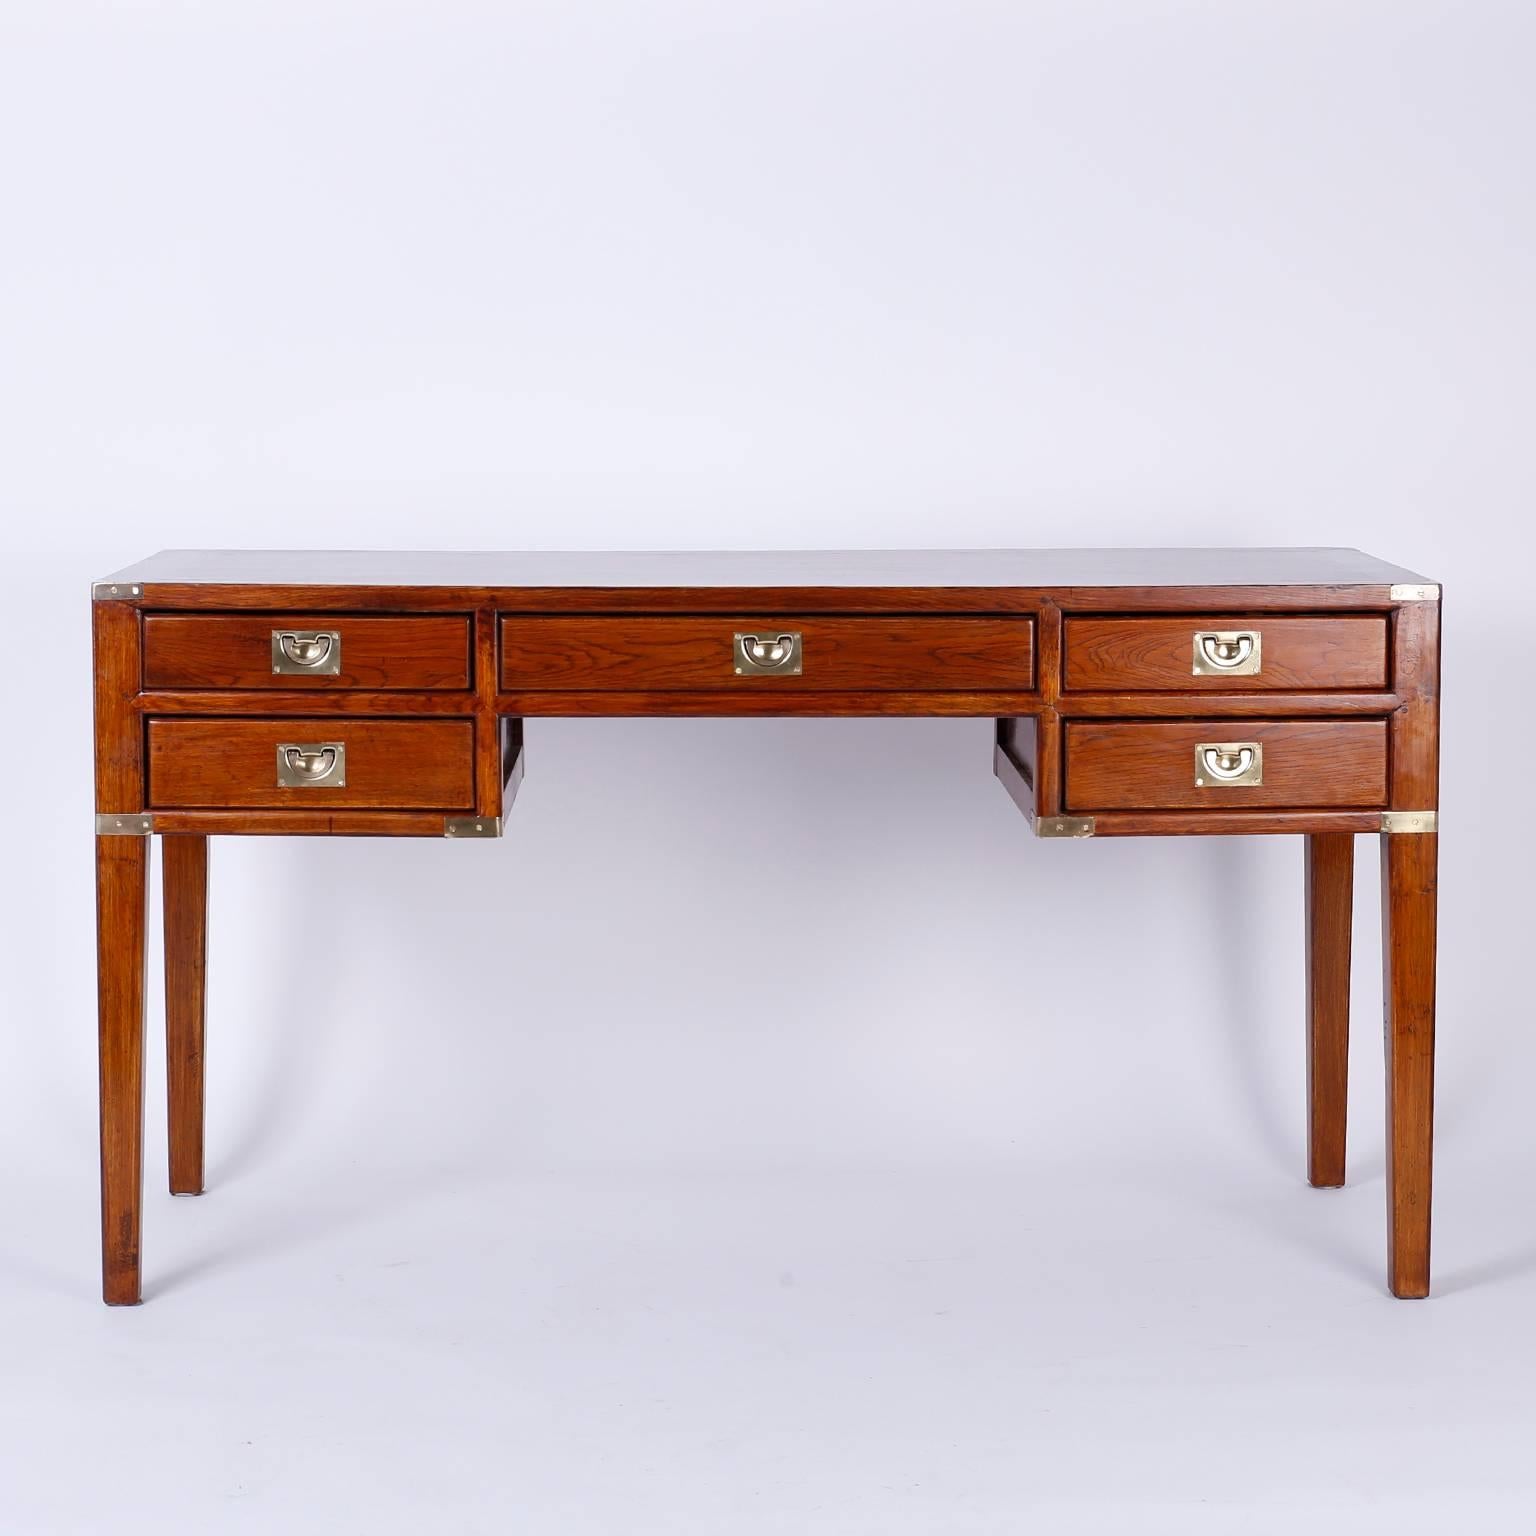 Campaign style desk or writing table with five drawers and polished brass campaign hardware. Crafted in oak with a finished back, tapered legs and sleek clean form that combines tradition with modern.